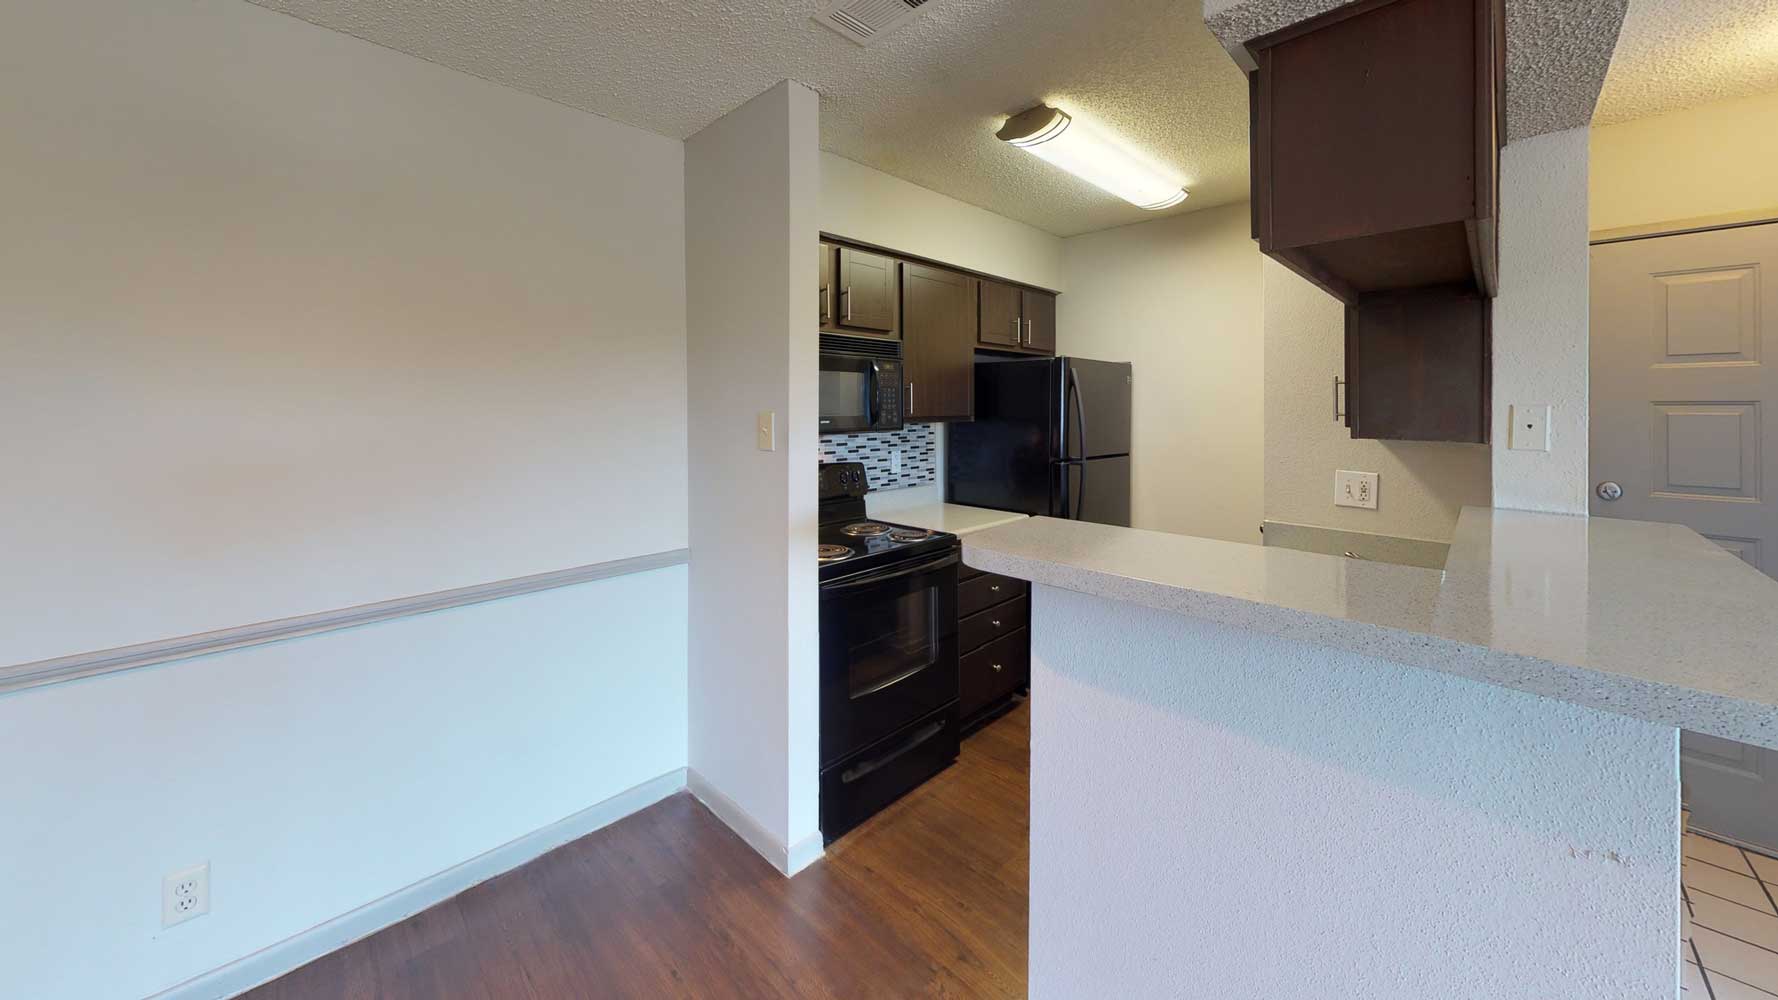 Kitchen with Bar at Ridgeview Place Apartments in Irving, TX